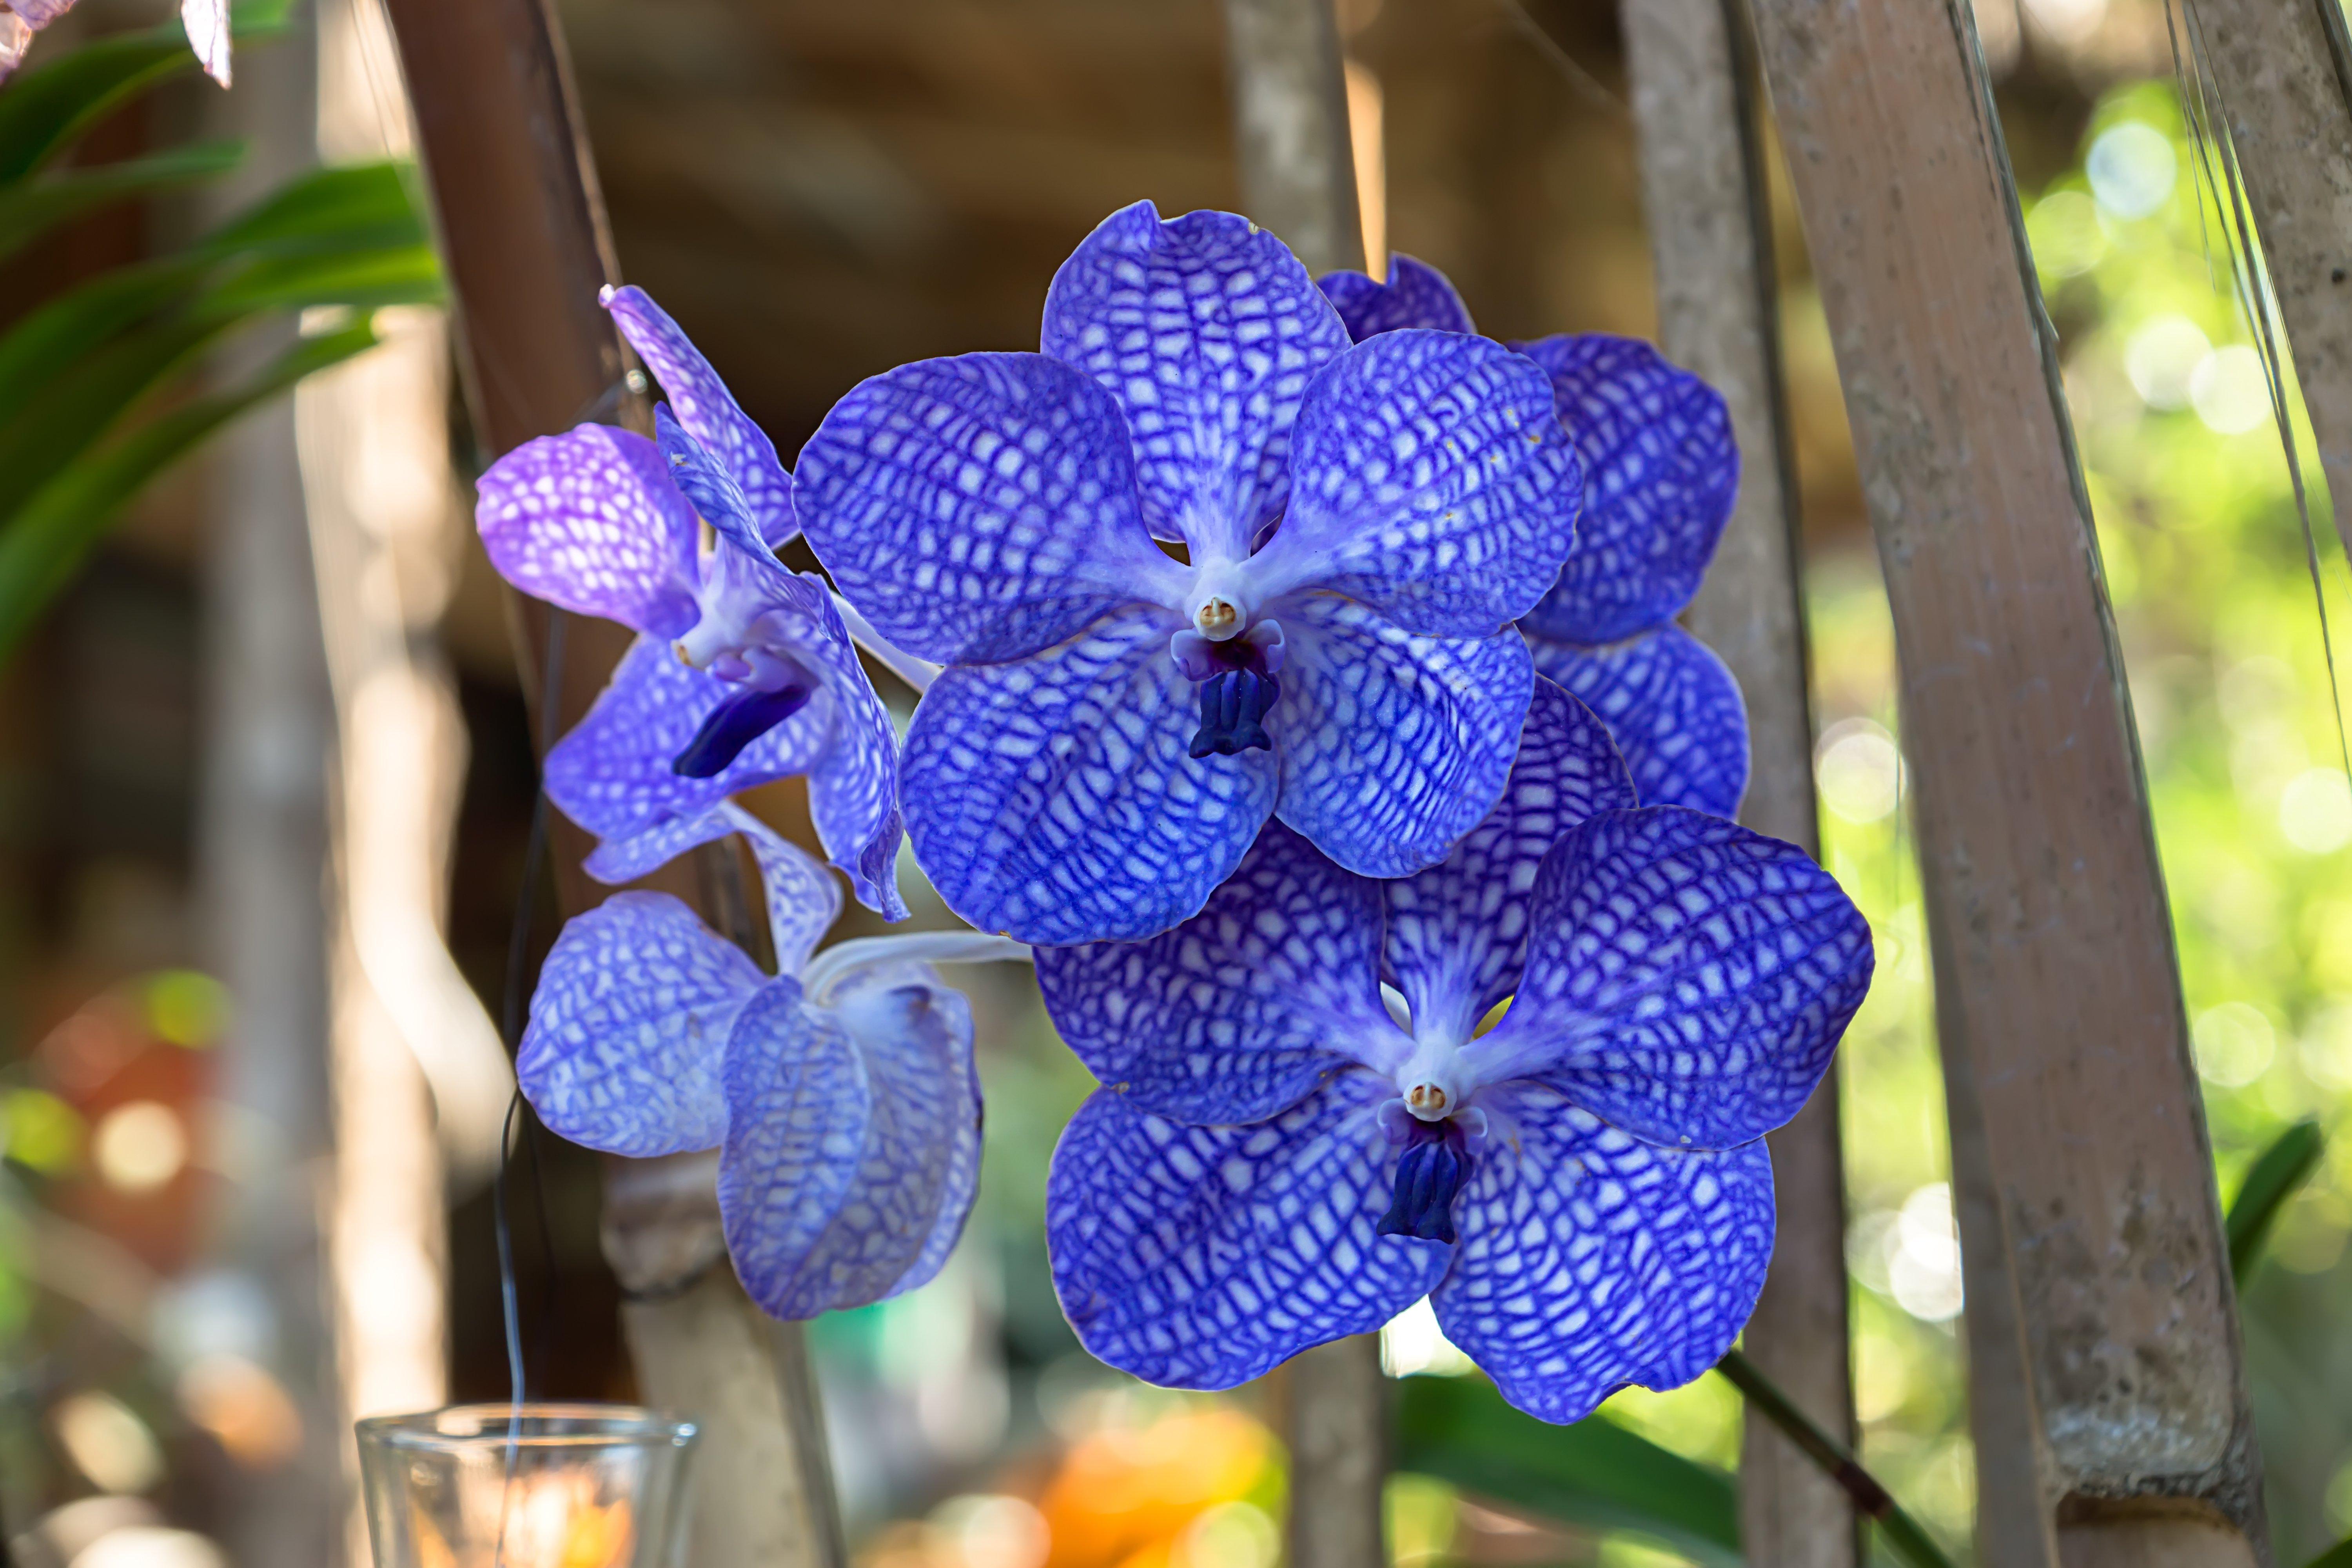 The all you need to know Flower Guide: Orchids